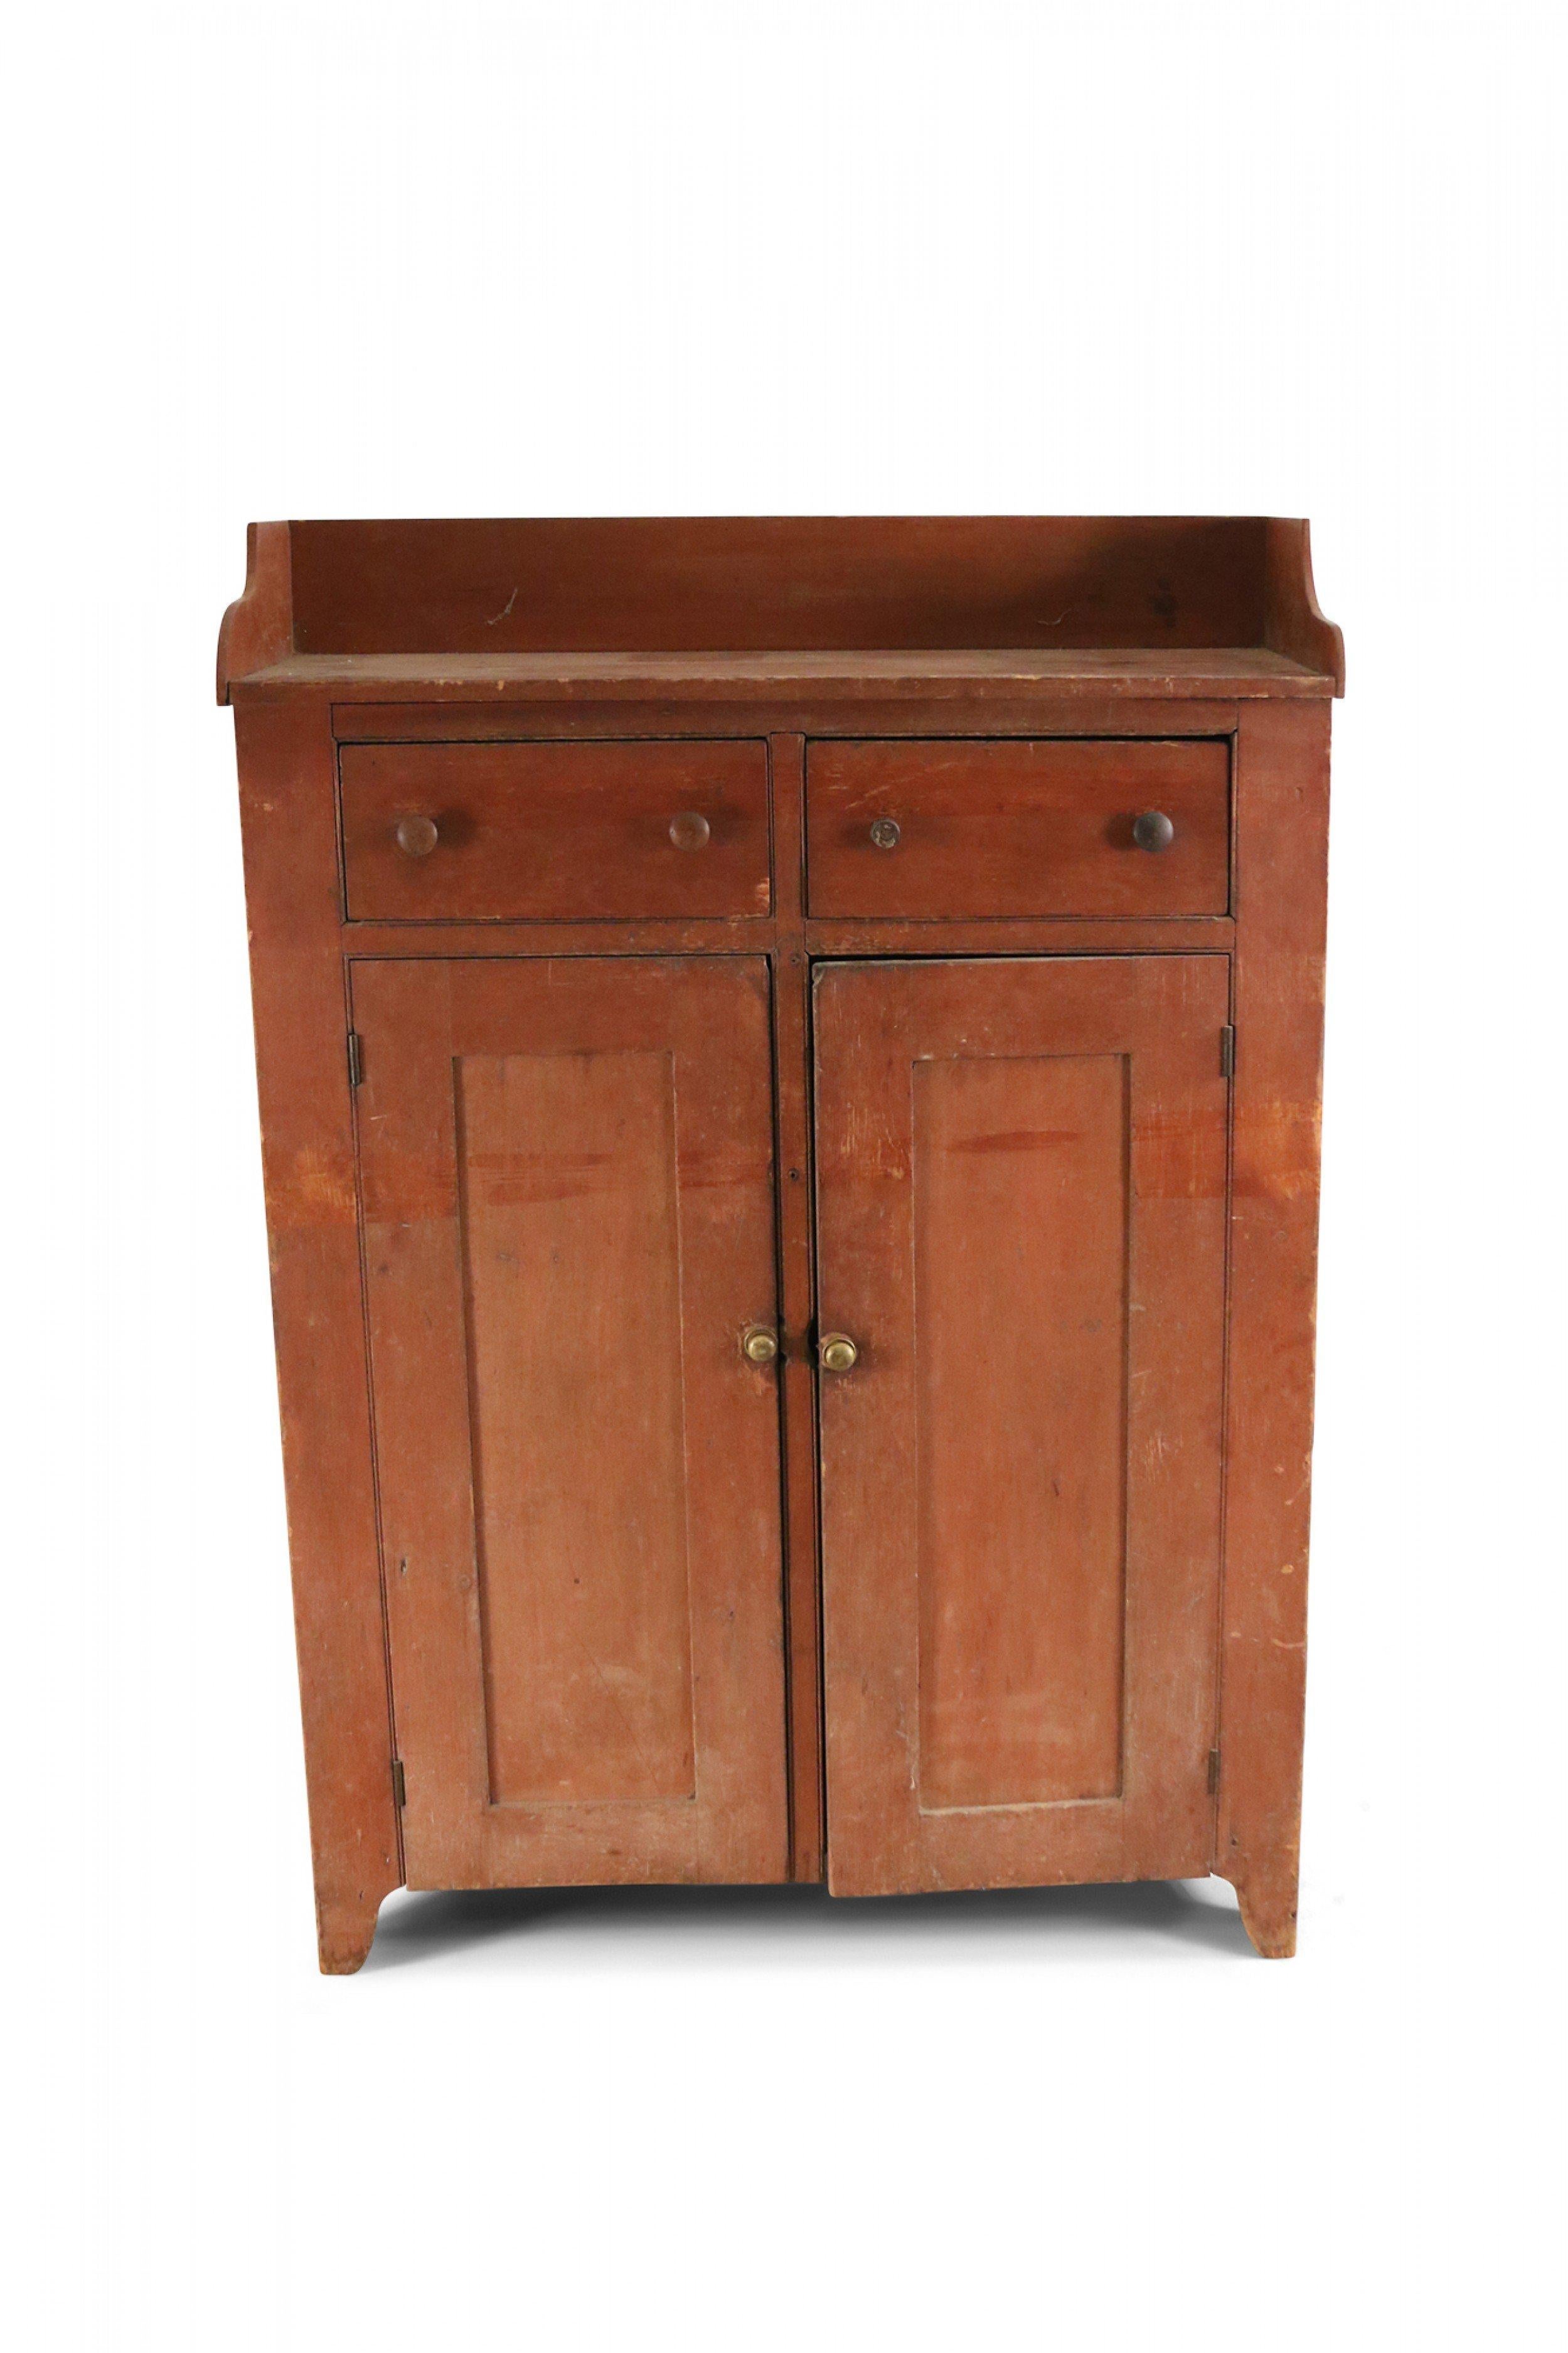 American Country-style (19/20th Century) stained pine wood storage cabinet with two hinged cabinet doors under two drawers with wooden drawer and cabinet pulls and a partial gallery around the top.
 